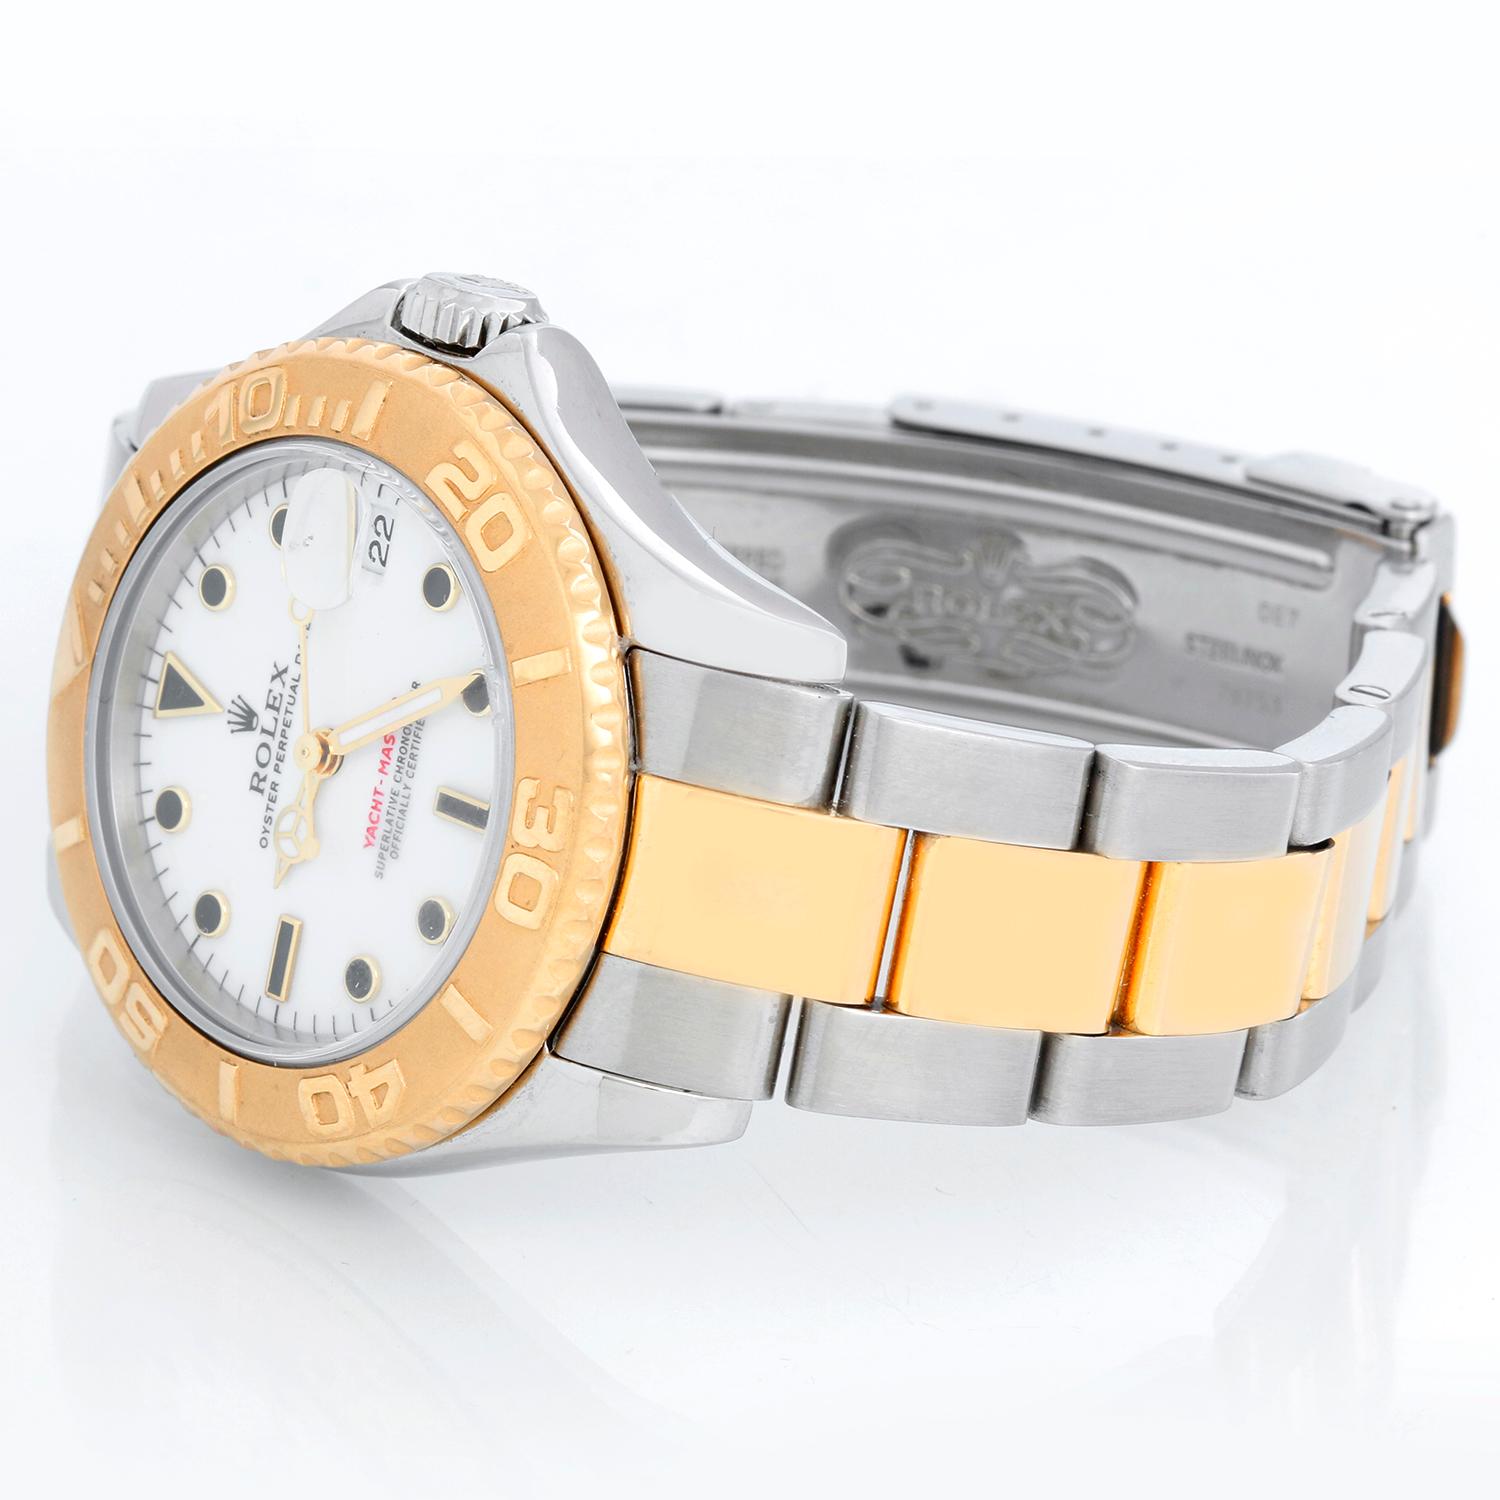 Rolex Midsize Yacht-Master 35mm Steel & Gold Men's or Ladies Watch 168623 - Automatic winding; sapphire crystal. Stainless steel case with 18k yellow gold bezel . White dial. Stainless steel and 18k yellow gold Oyster bracelet with flip-lock clasp.